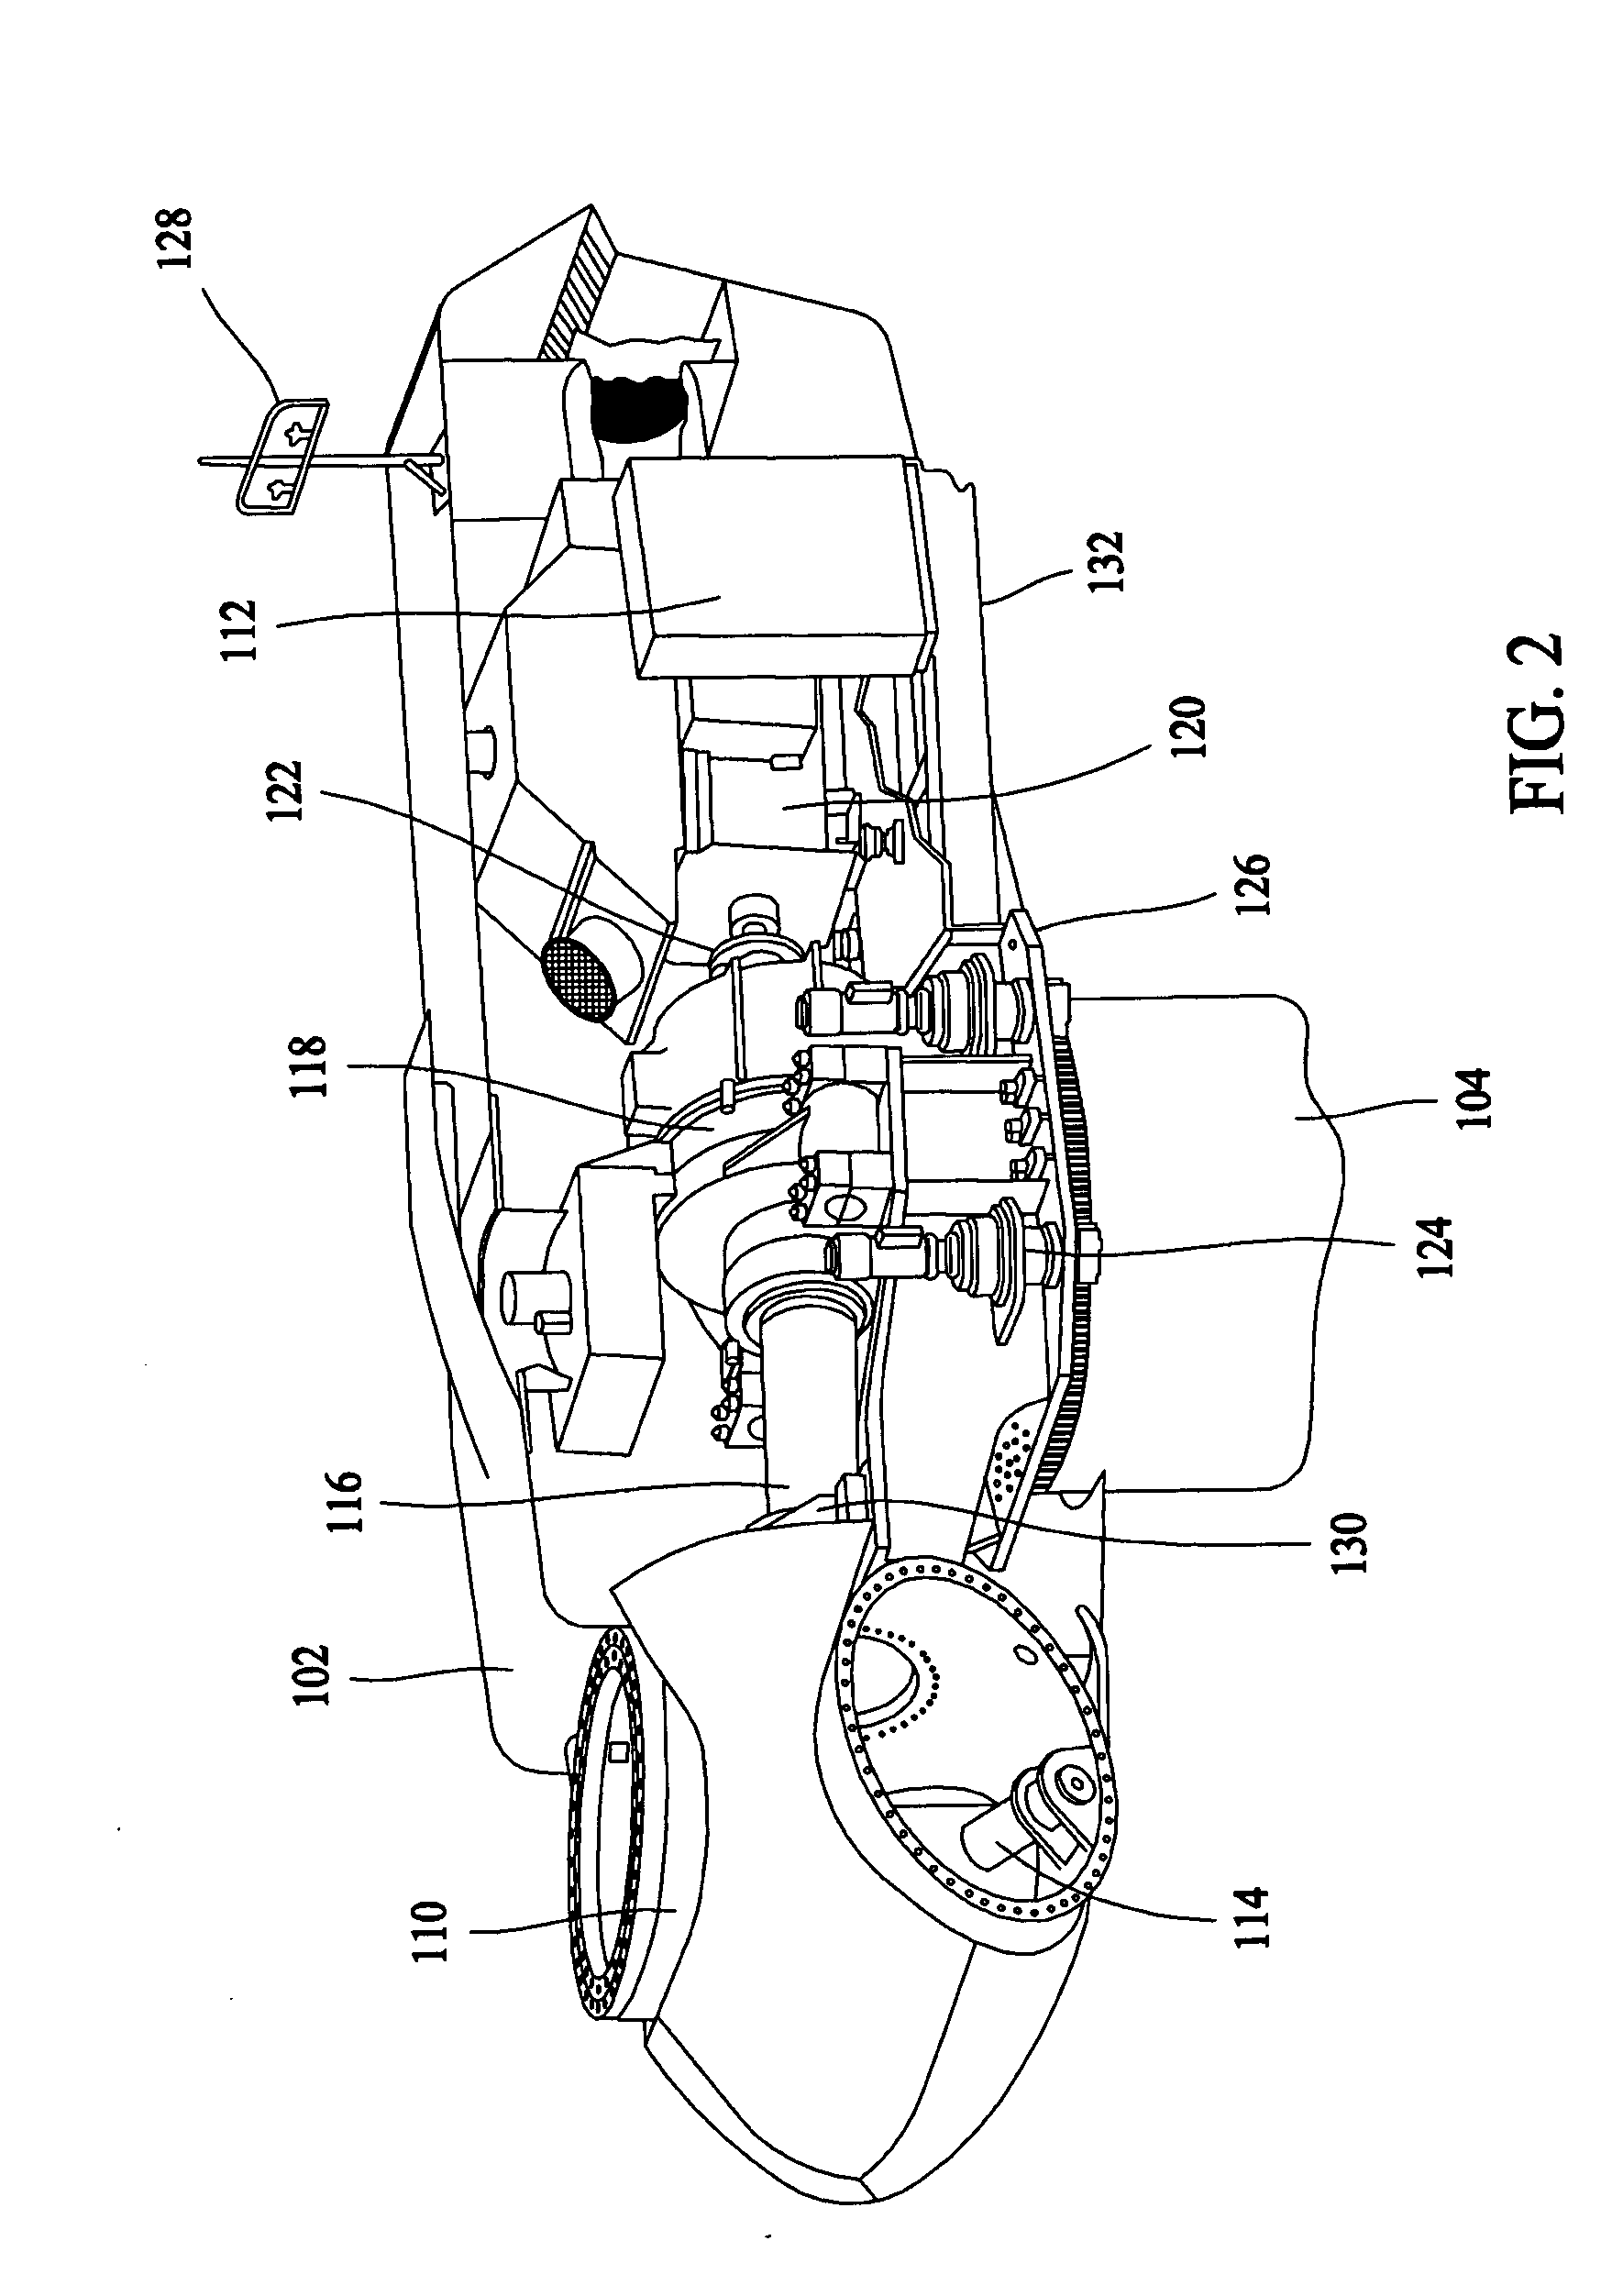 Method and apparatus for reducing rotor blade deflections, loads, and/or peak rotational speed